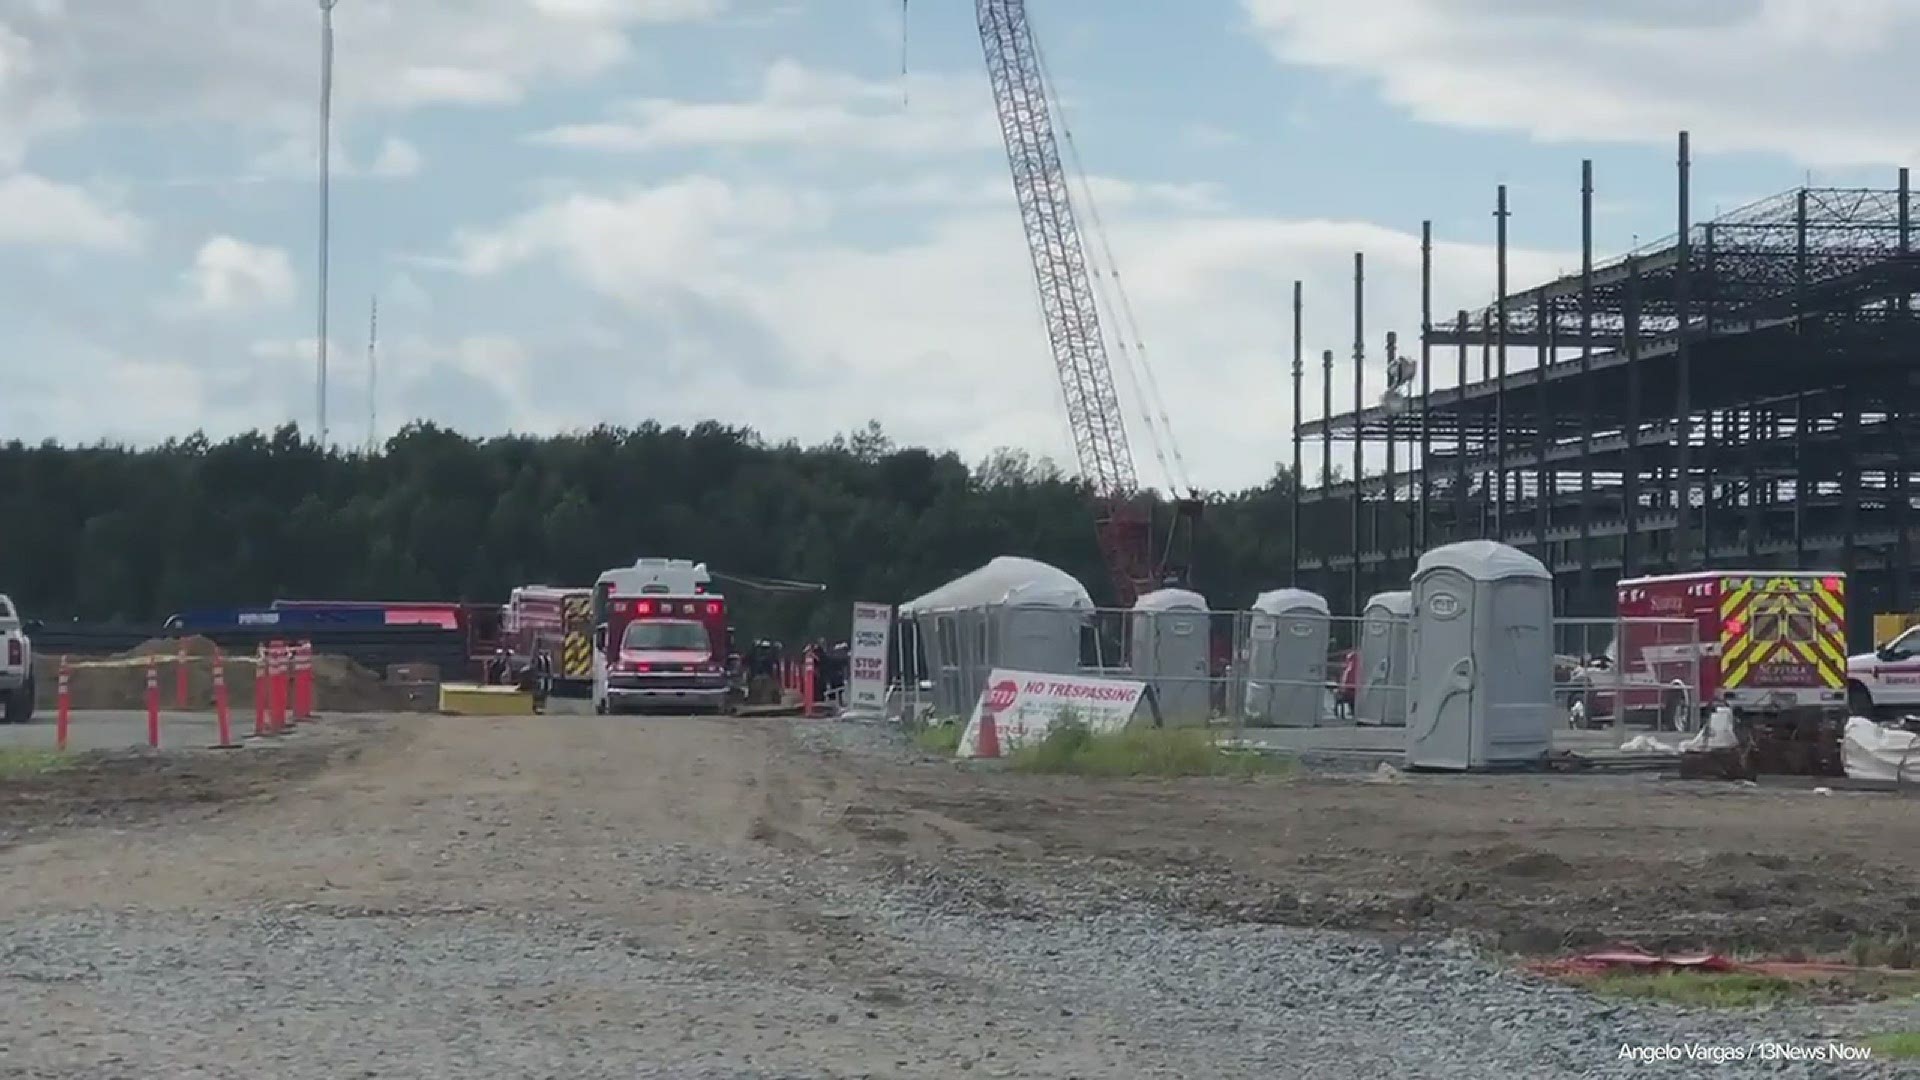 Suffolk Fire & Rescue crews are searching for other workers who may have survived the accident. The Amazon robotics fulfillment center was under construction.